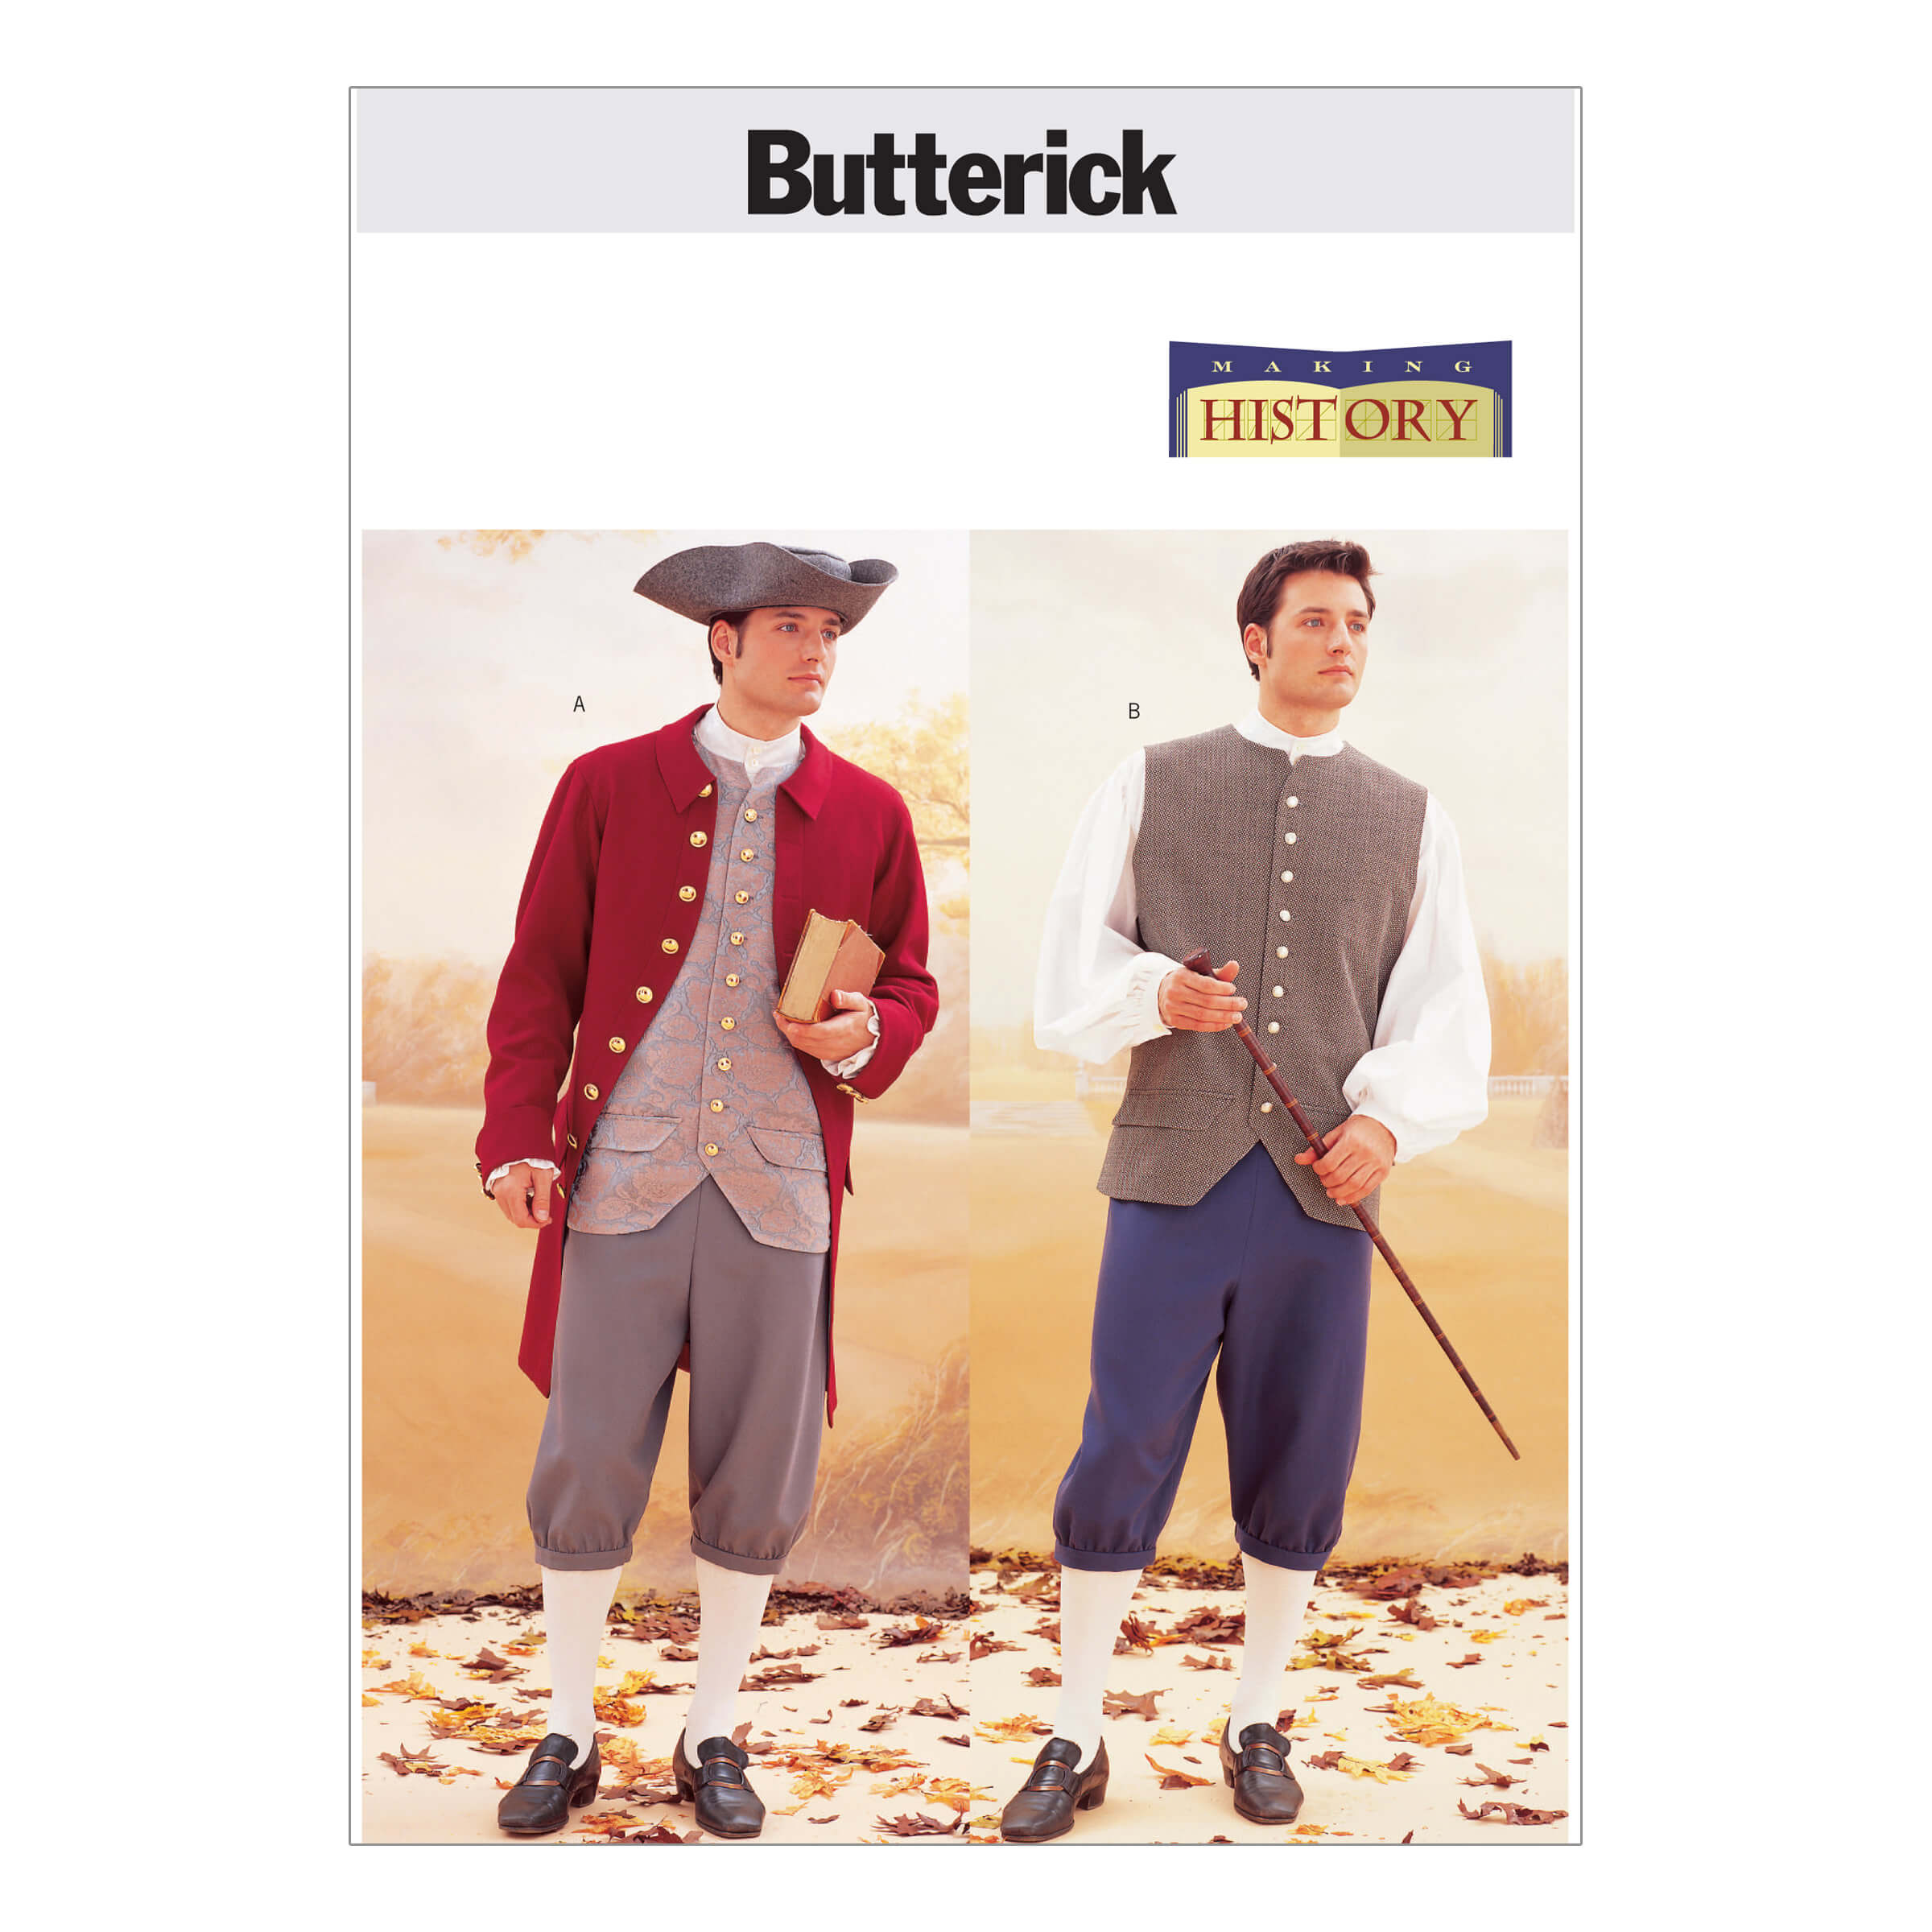 Butterick Sewing Pattern B3072 Historical Costume (Coat, Vest, Shirt, Pants and Hat)